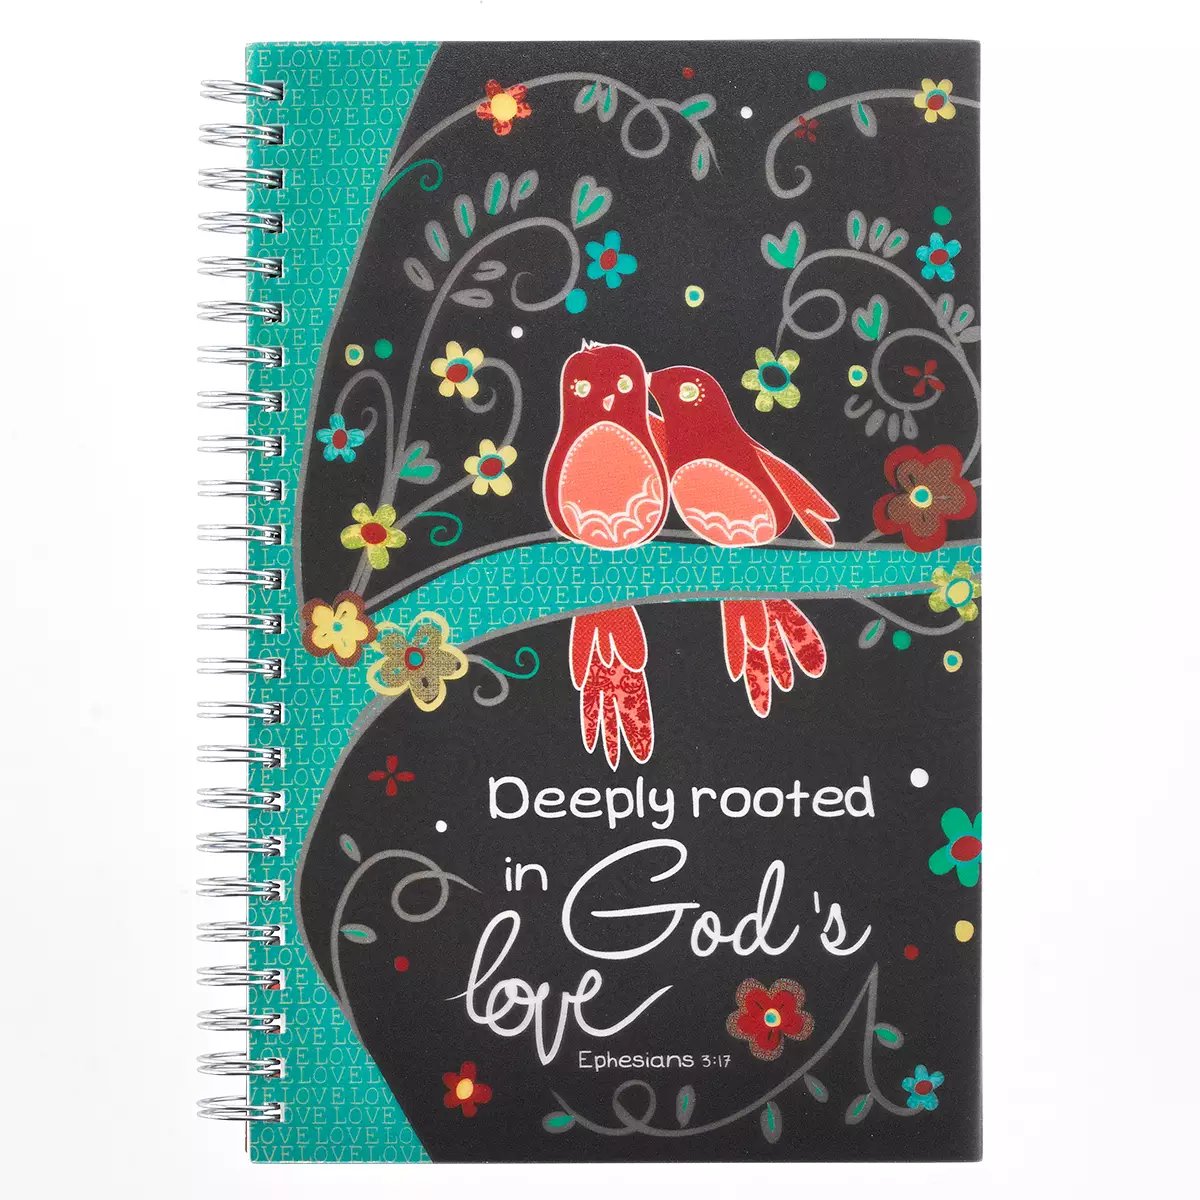 Christian Art Gifts Notebook/Journal | Deeply Rooted God s Love Ephesians 3:17 Bible Verse | Inspirational Wire Bound Spiral Notebook w/128 Lined Pages, 6 x 8.5 Inches